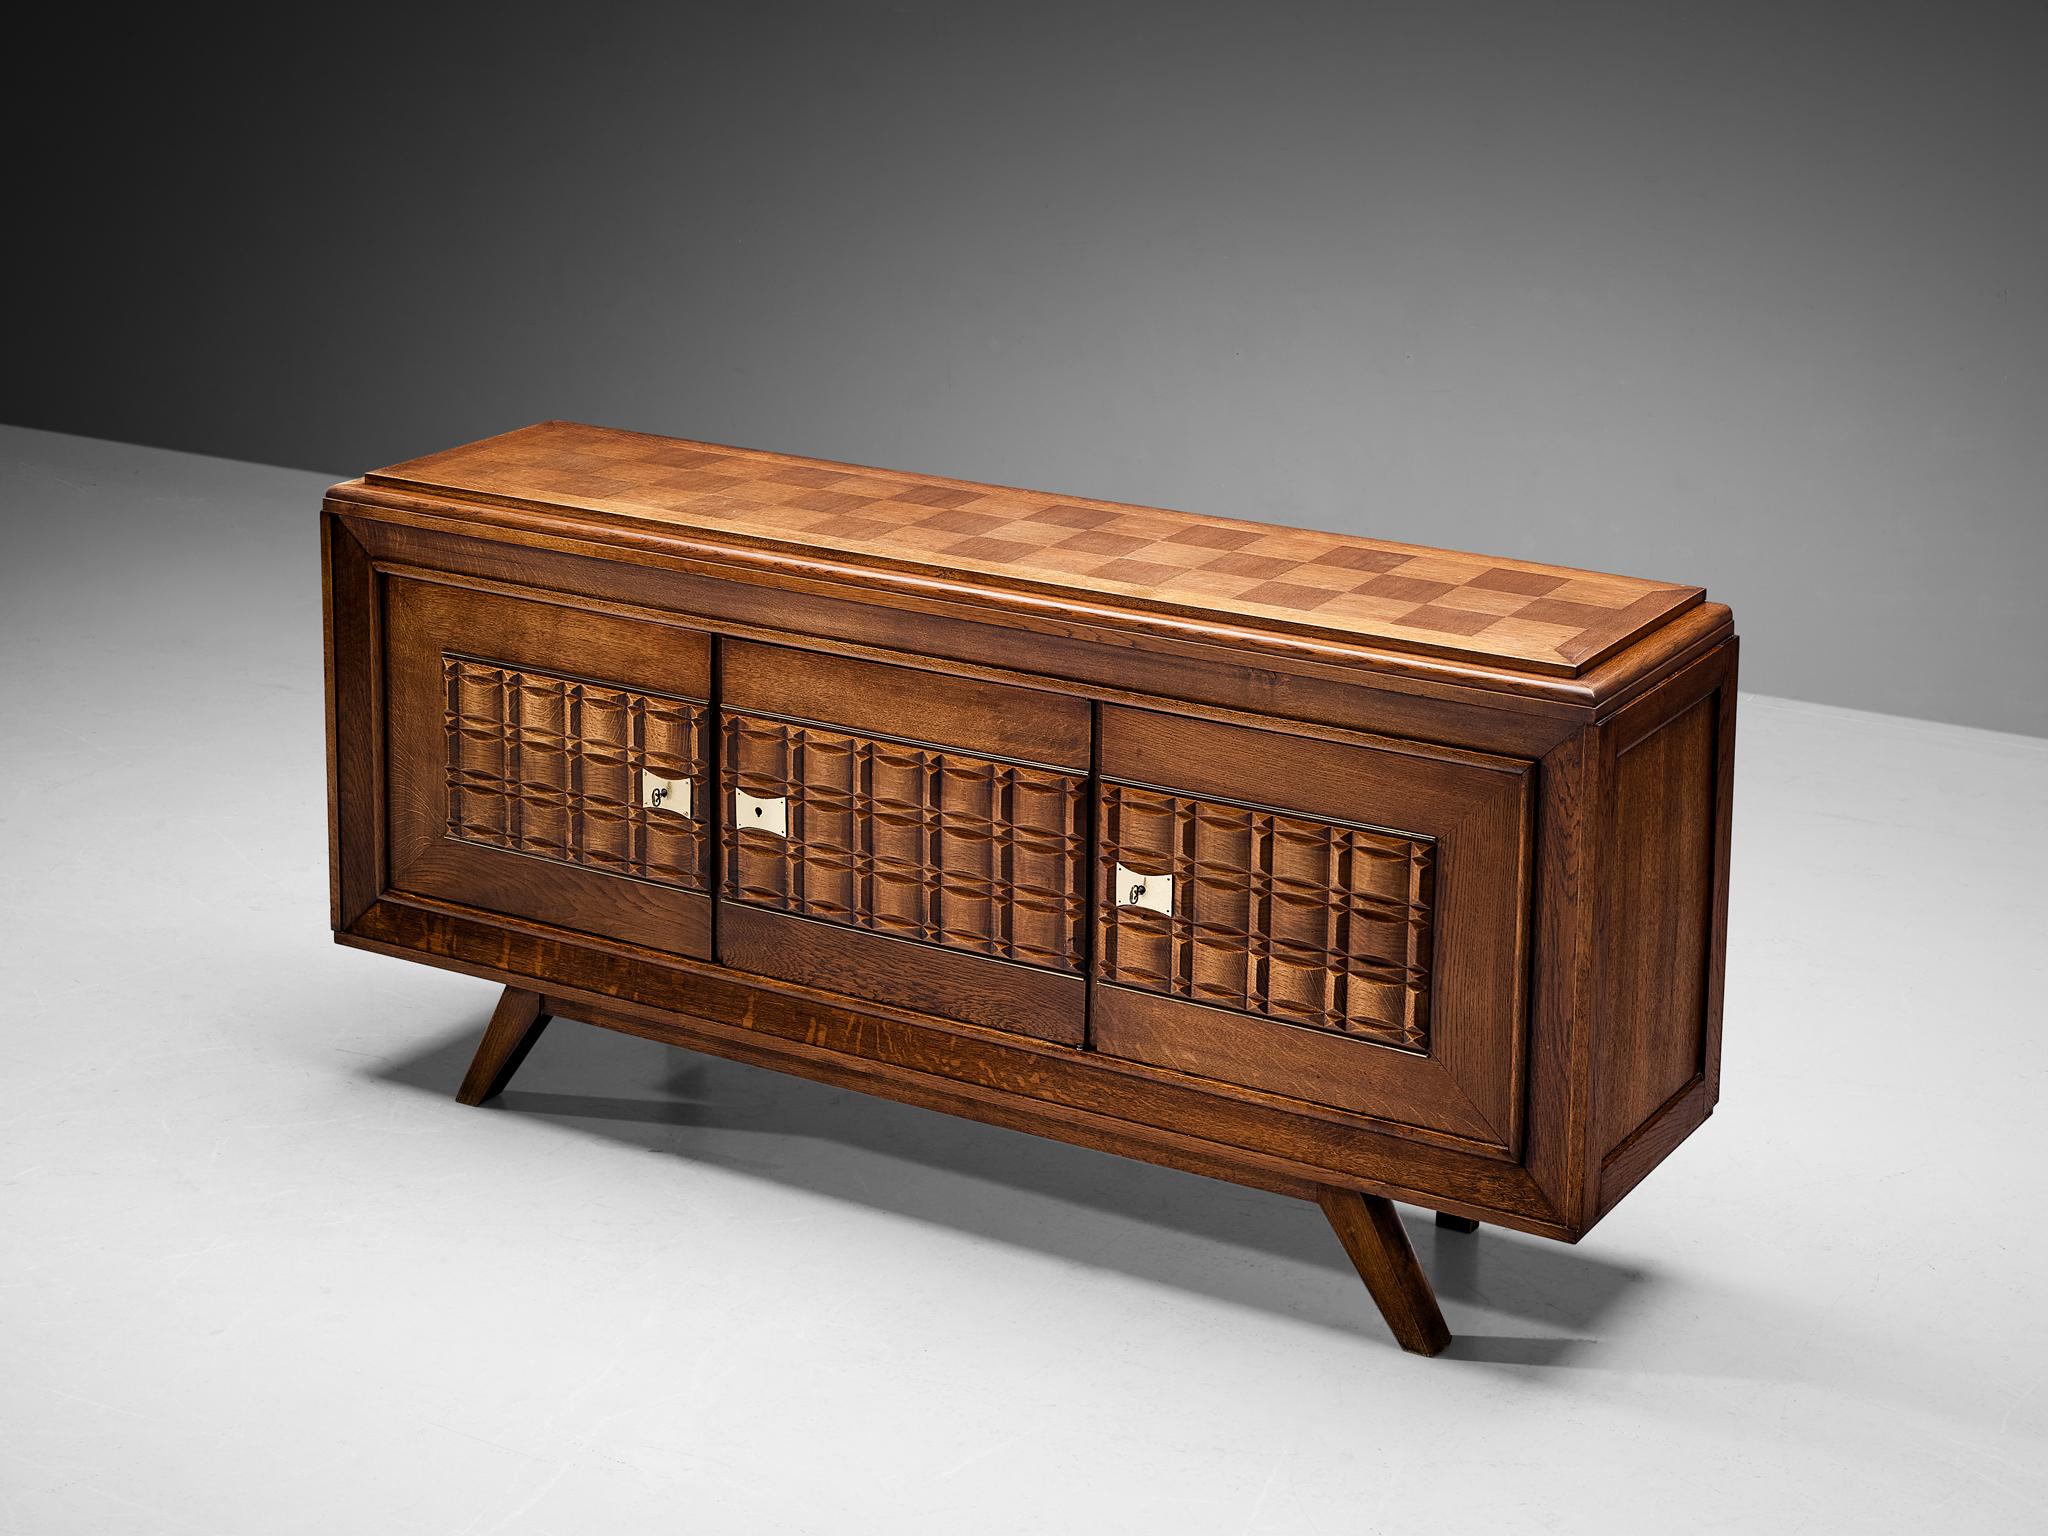 Sideboard, oak, brass, France, 1940s.

This exceptional credenza undoubtedly breathes the Art Deco Period of the 1940s. Excellent craftsmanship is combined with a well-balanced eye for the composition of functional and decorative elements. Truly